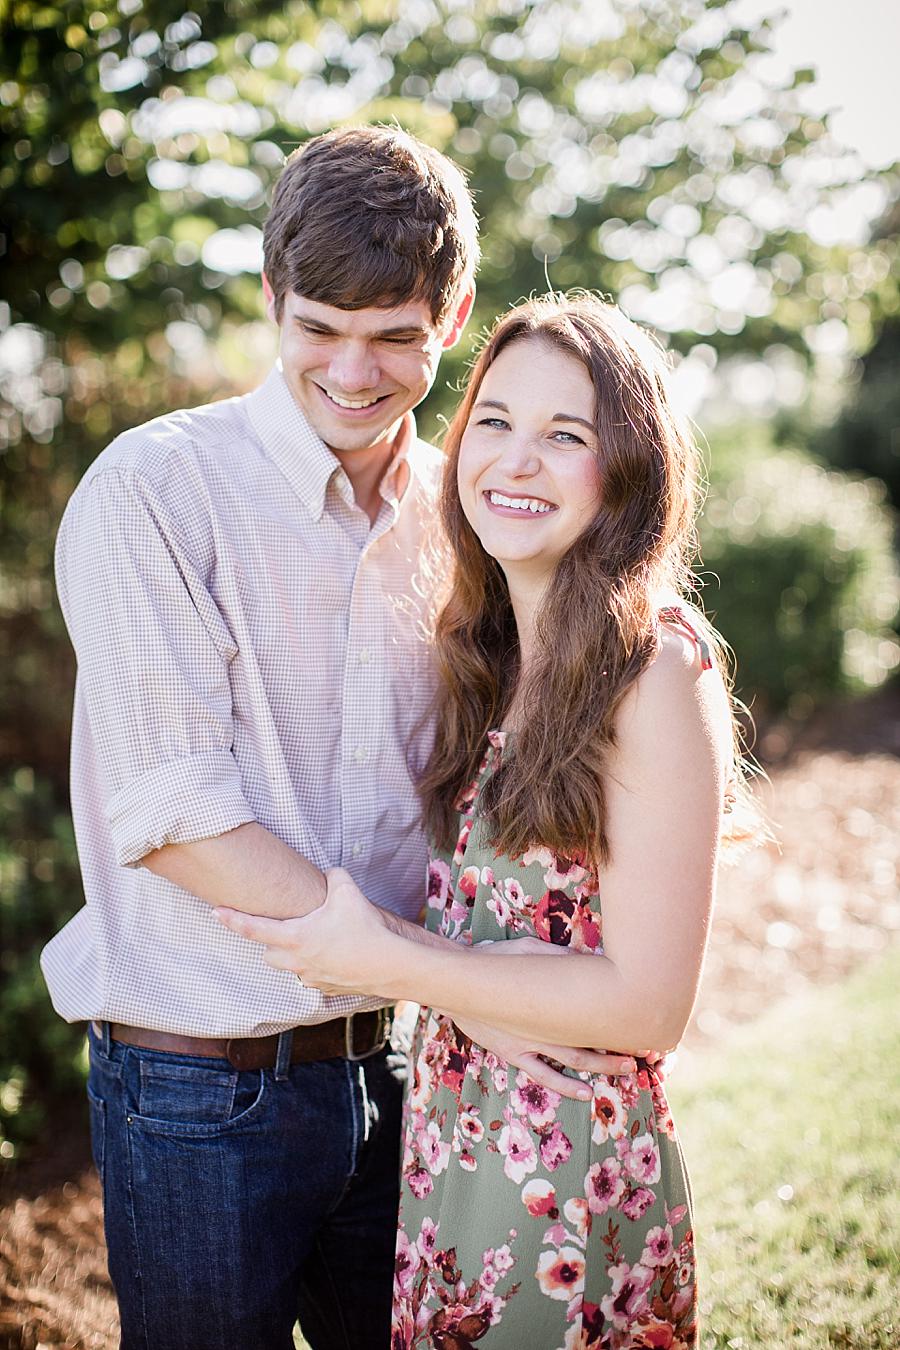 Floral dress at this Shelby Bottoms Park family session by Knoxville Wedding Photographer, Amanda May Photos.